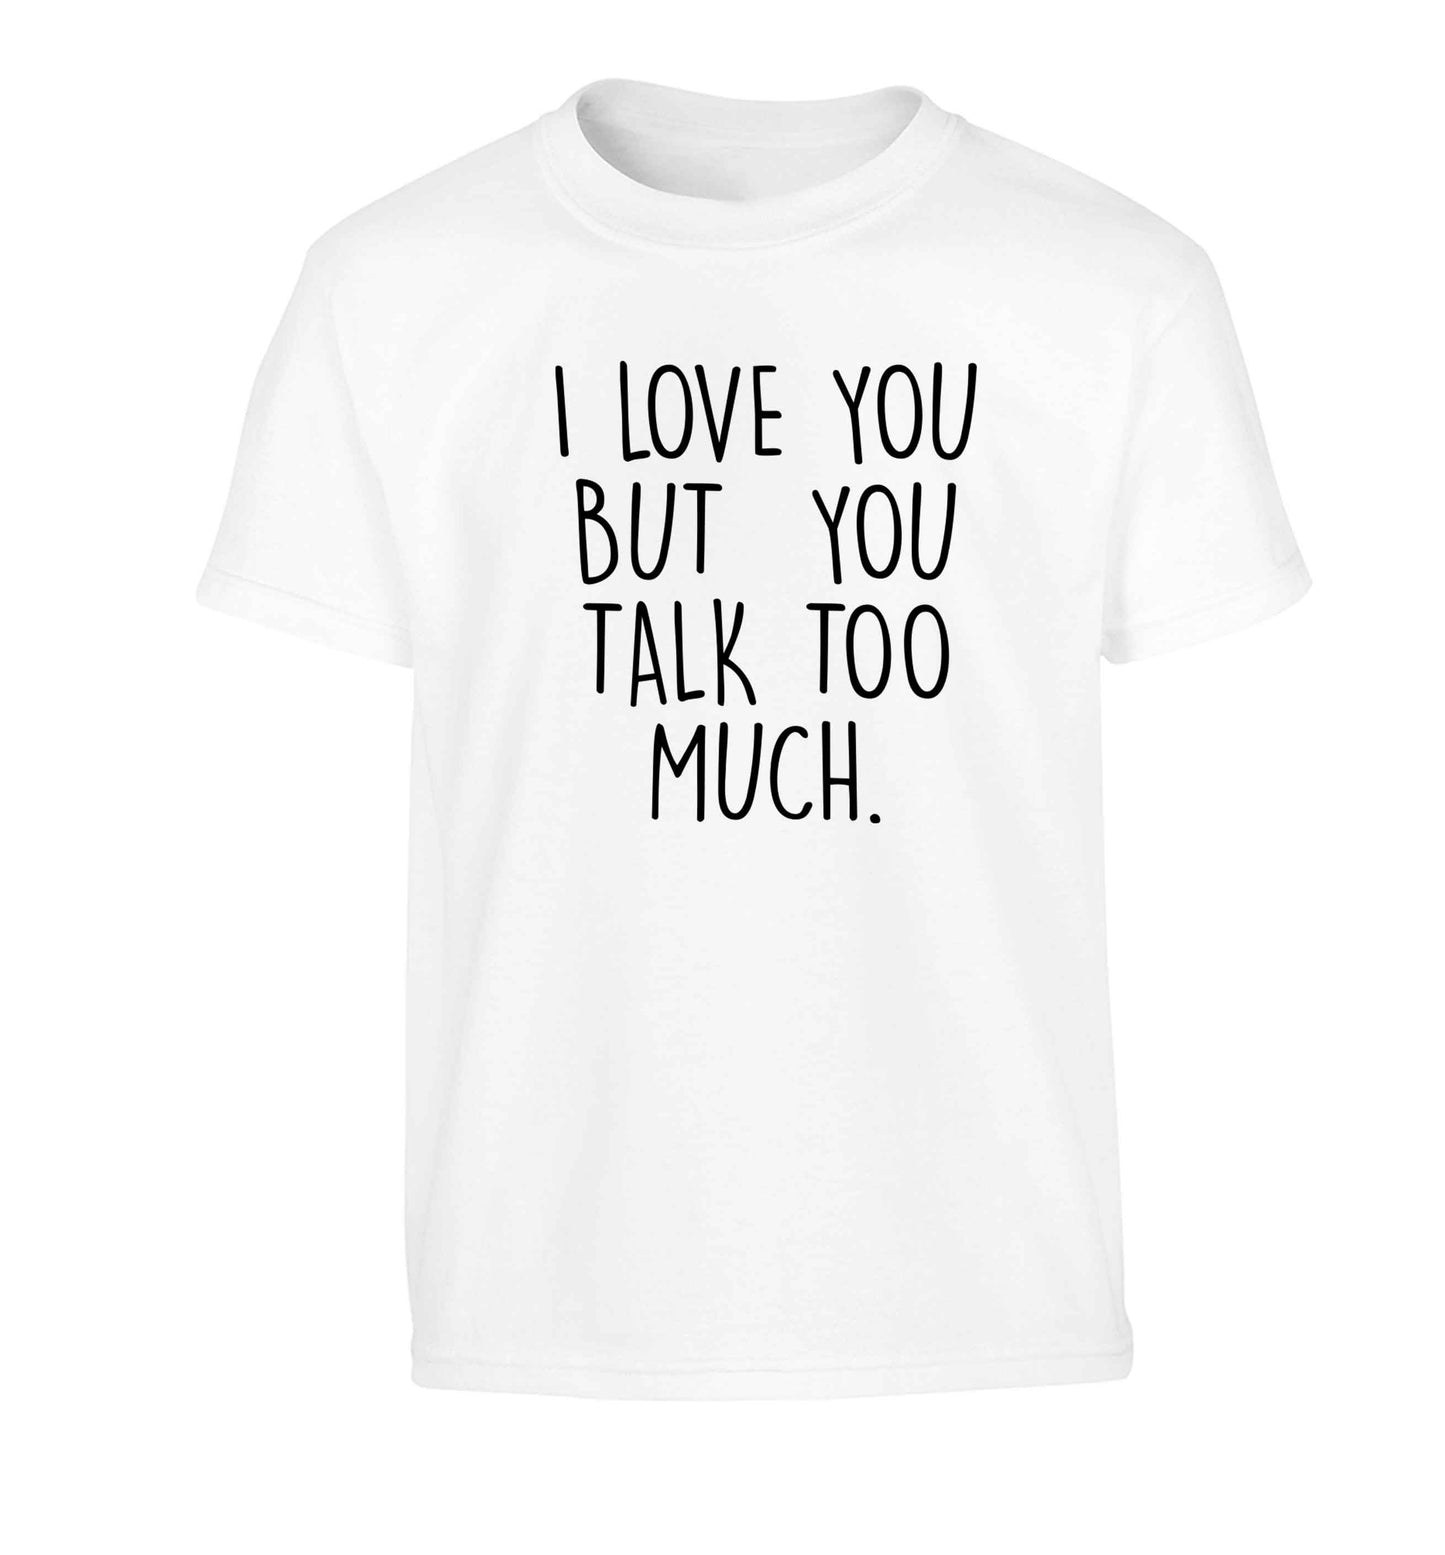 I love you but you talk too much Children's white Tshirt 12-13 Years